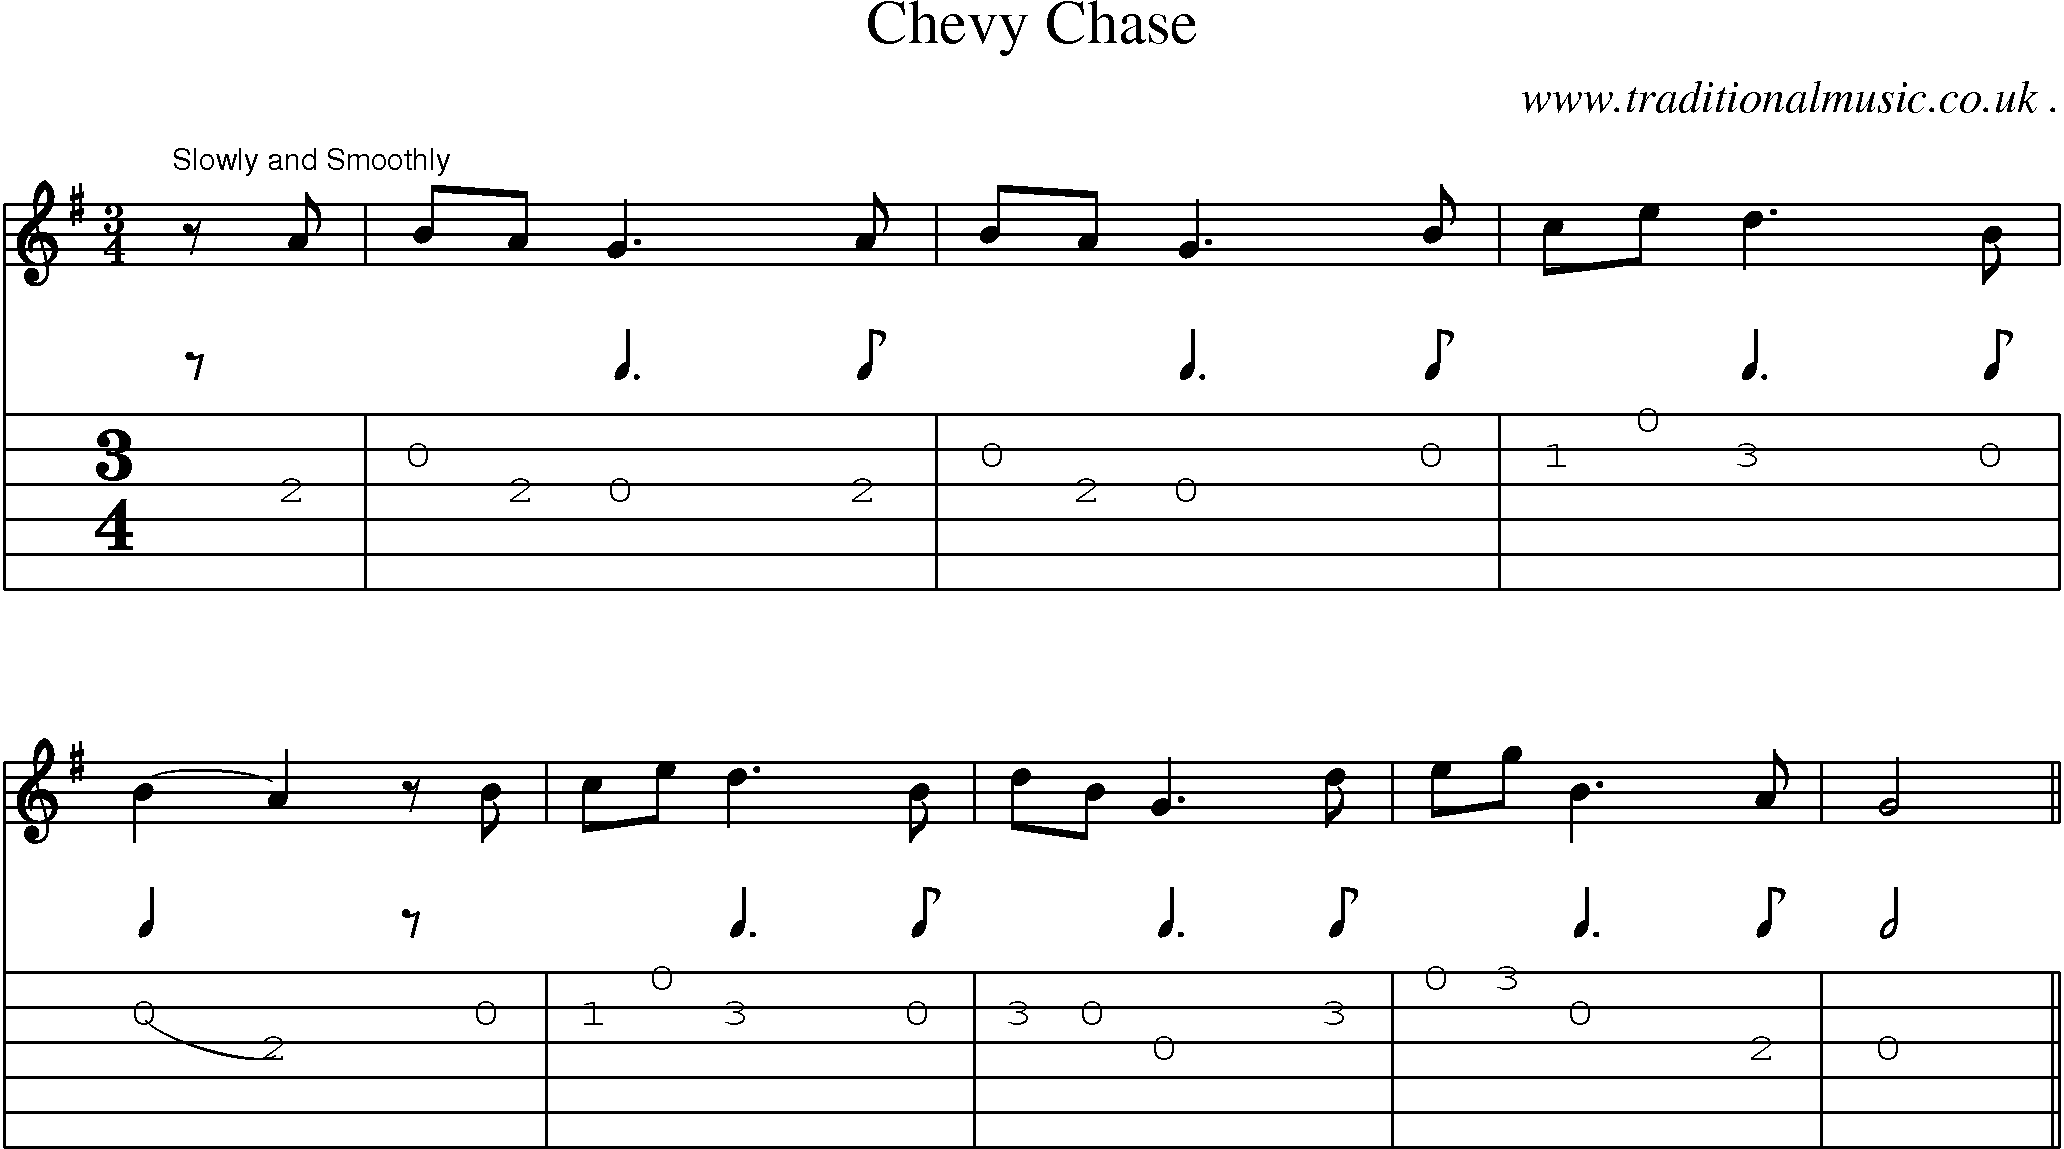 Sheet-Music and Guitar Tabs for Chevy Chase